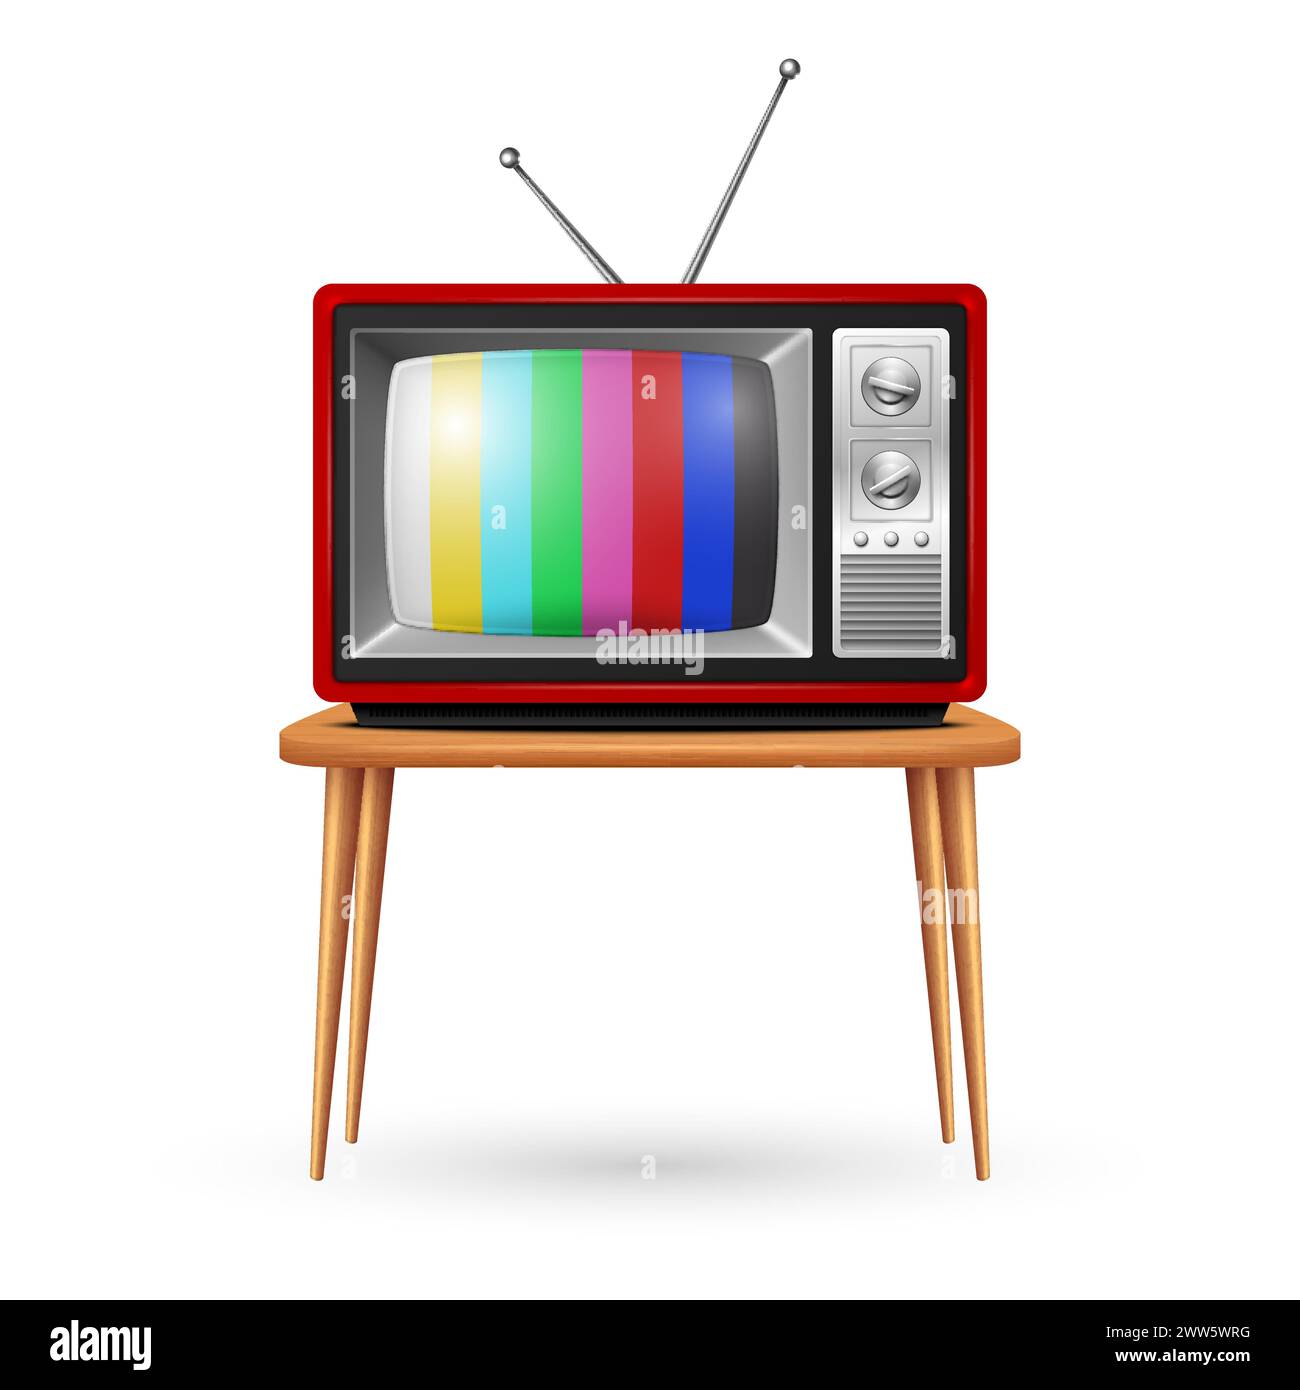 Vector Red Retro TV Set on the Wooden Table, Isolated, Front View. Vintage TV Design Template. Classic Retro TV Receiver with Test Chart Stock Vector